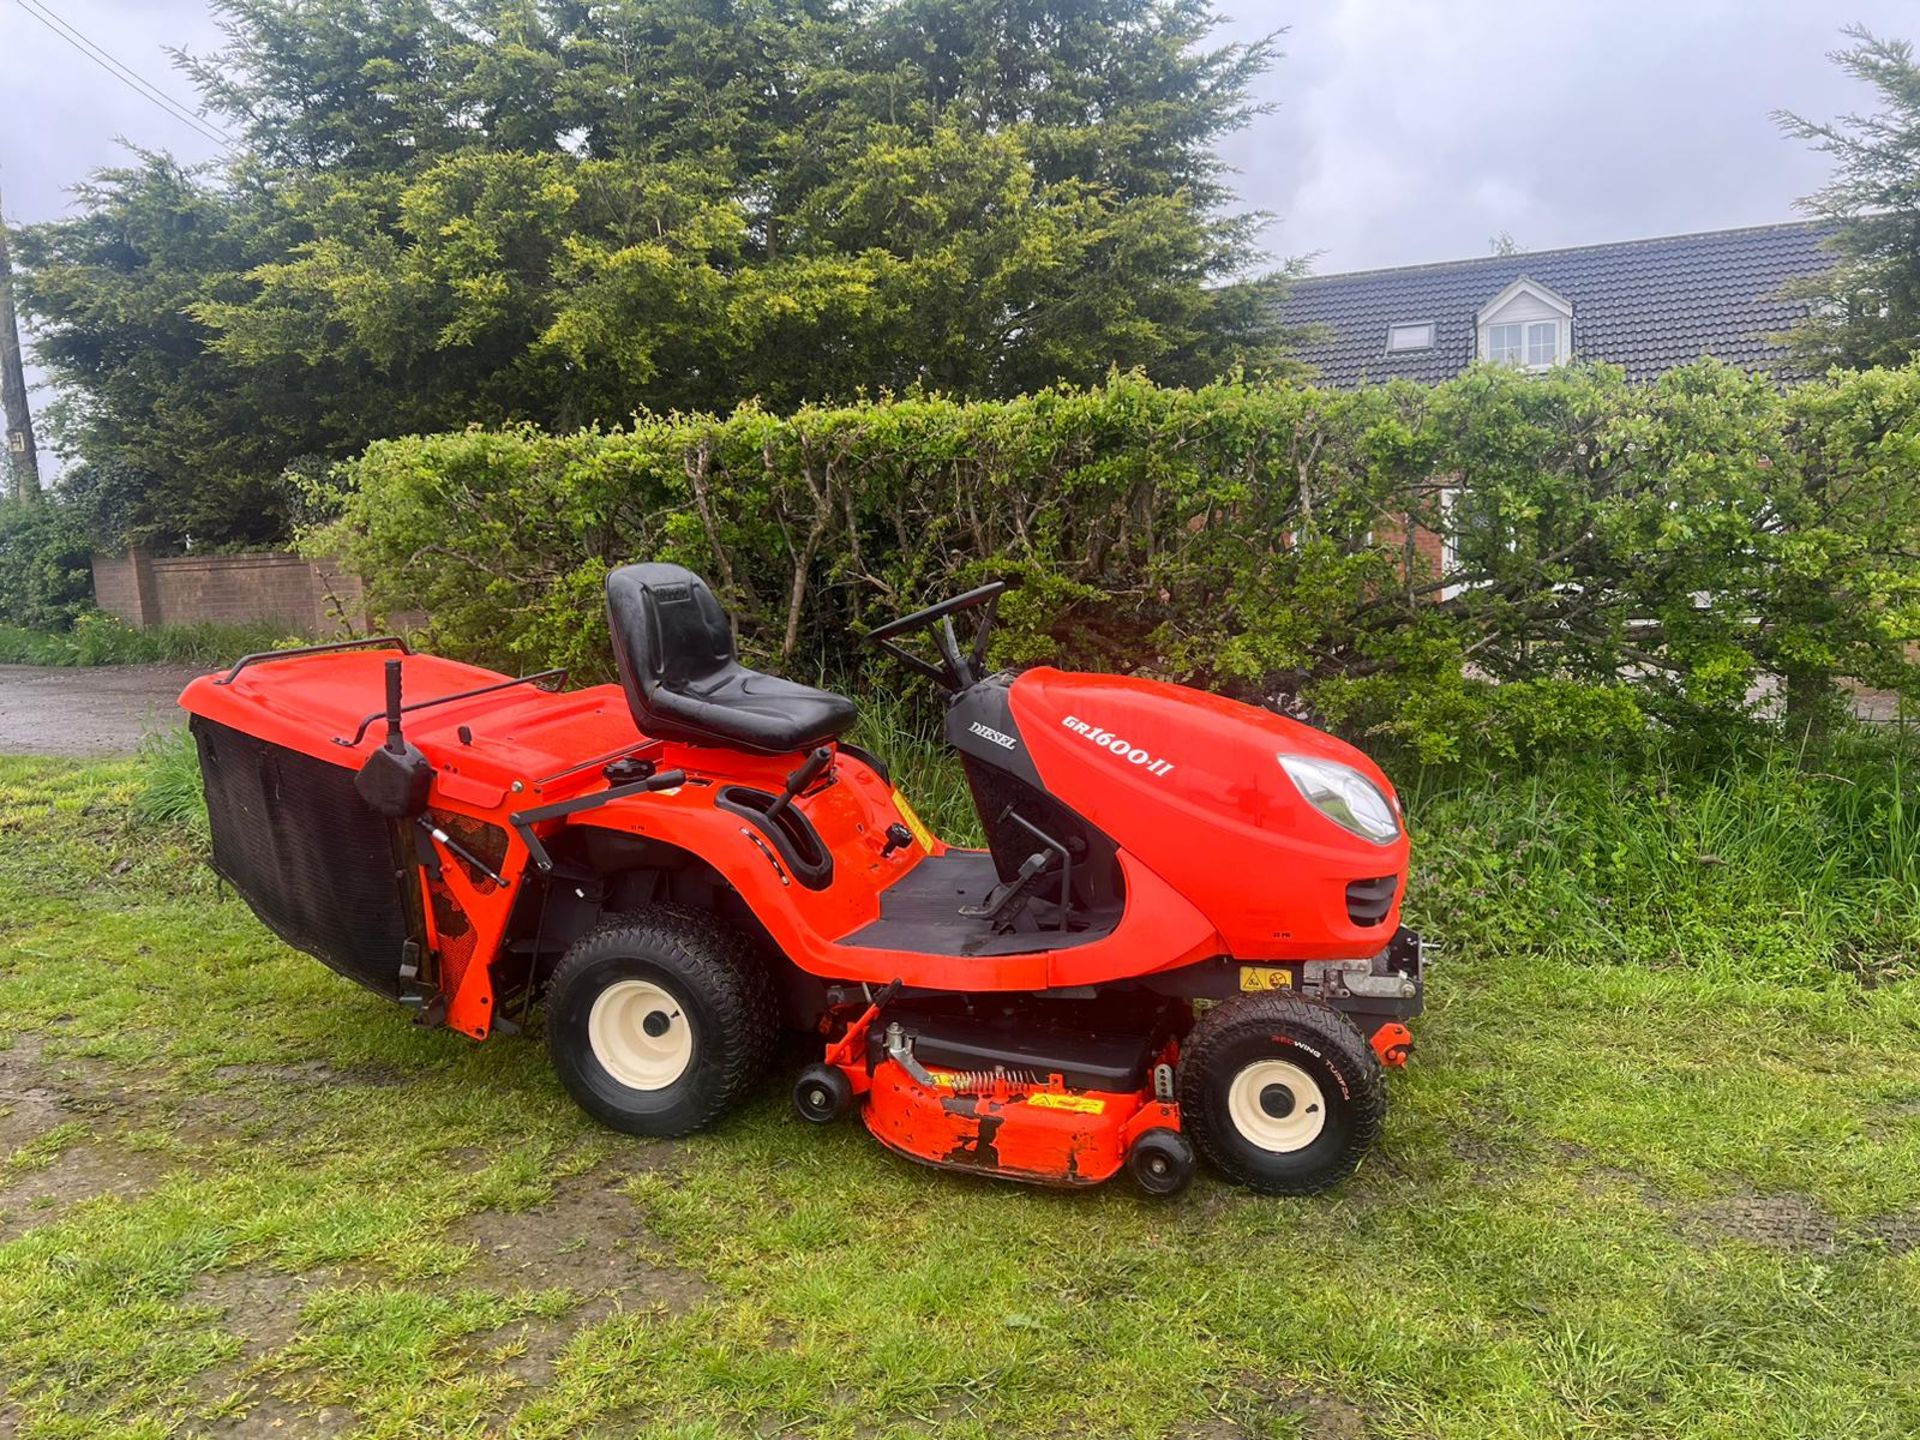 2017 KUBOTA GR1600 RIDE ON LAWN MOWER WITH COLLECTOR *PLUS VAT* - Image 6 of 12